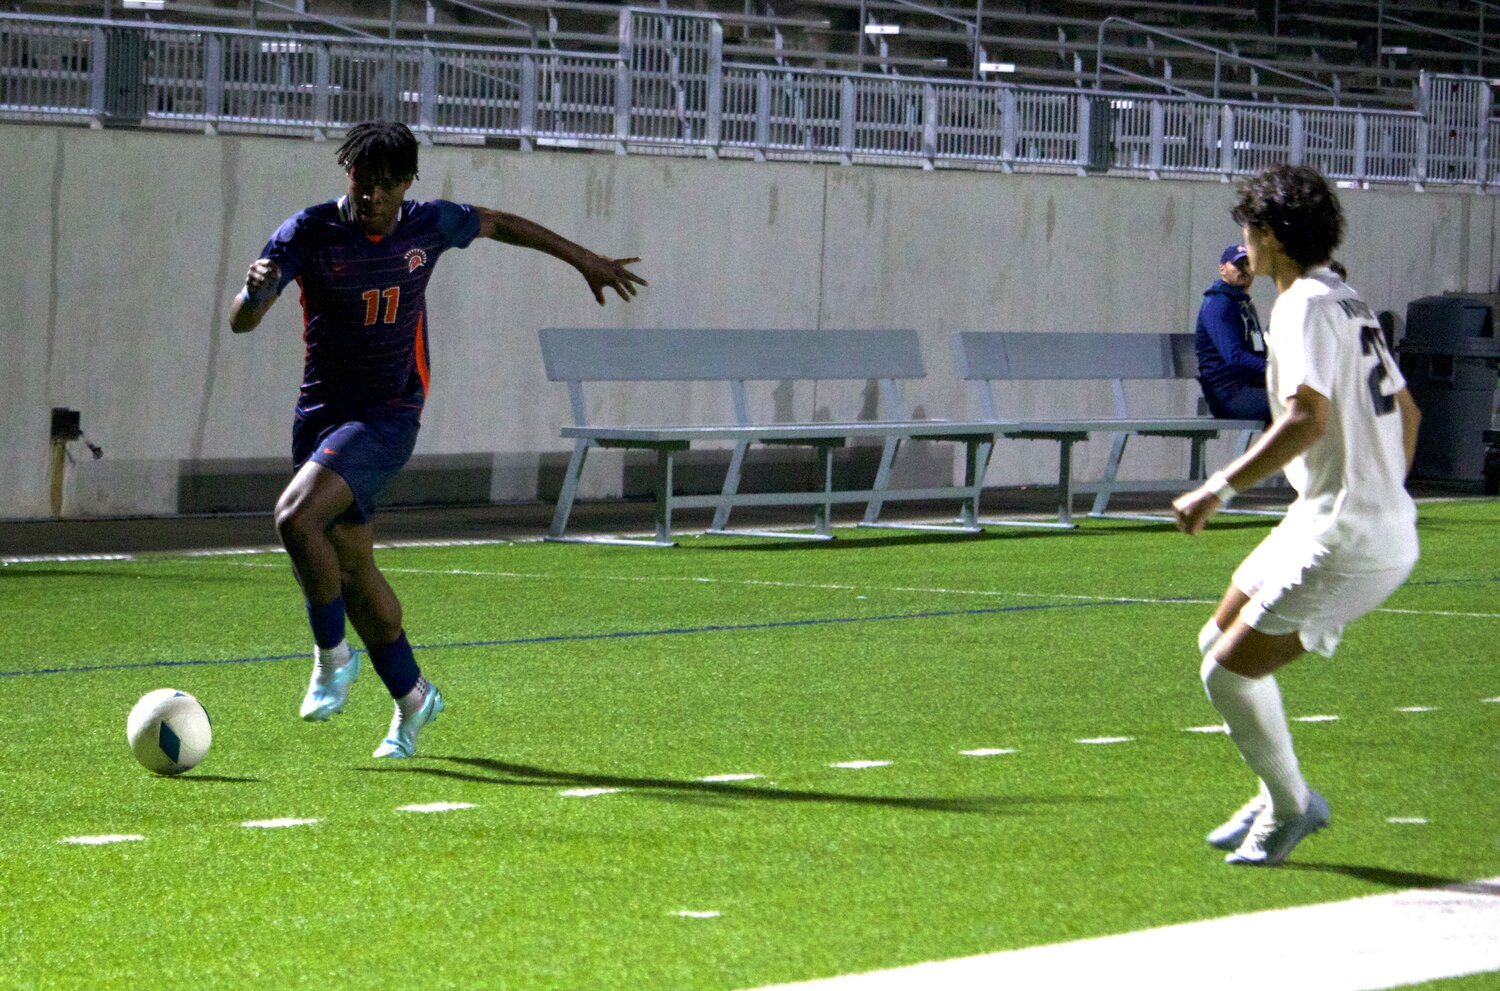 Daniel Ejerenwa dribbles up the field during Friday’s game between Seven Lakes and Jordan at Legacy Stadium.